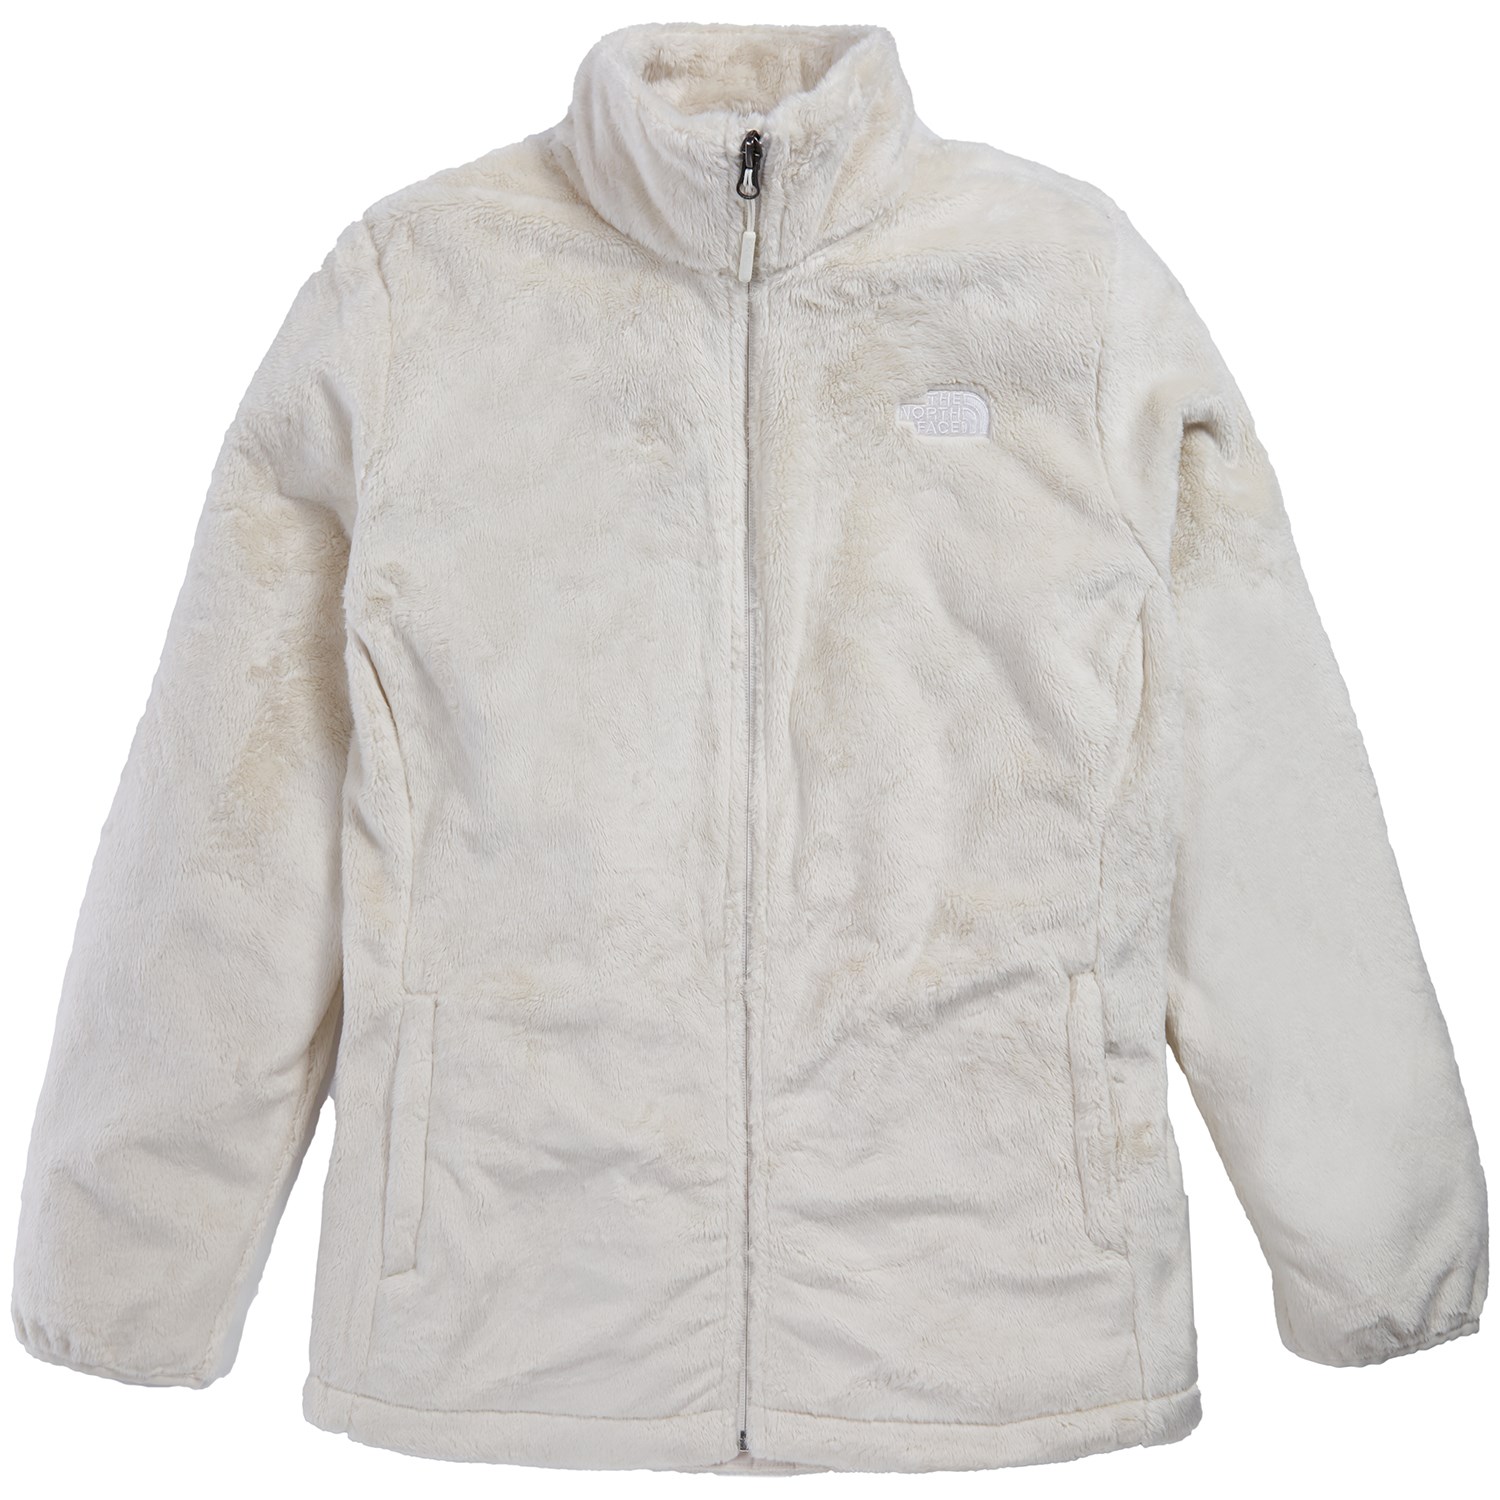 The North Face Osito Plus Jacket - Women's